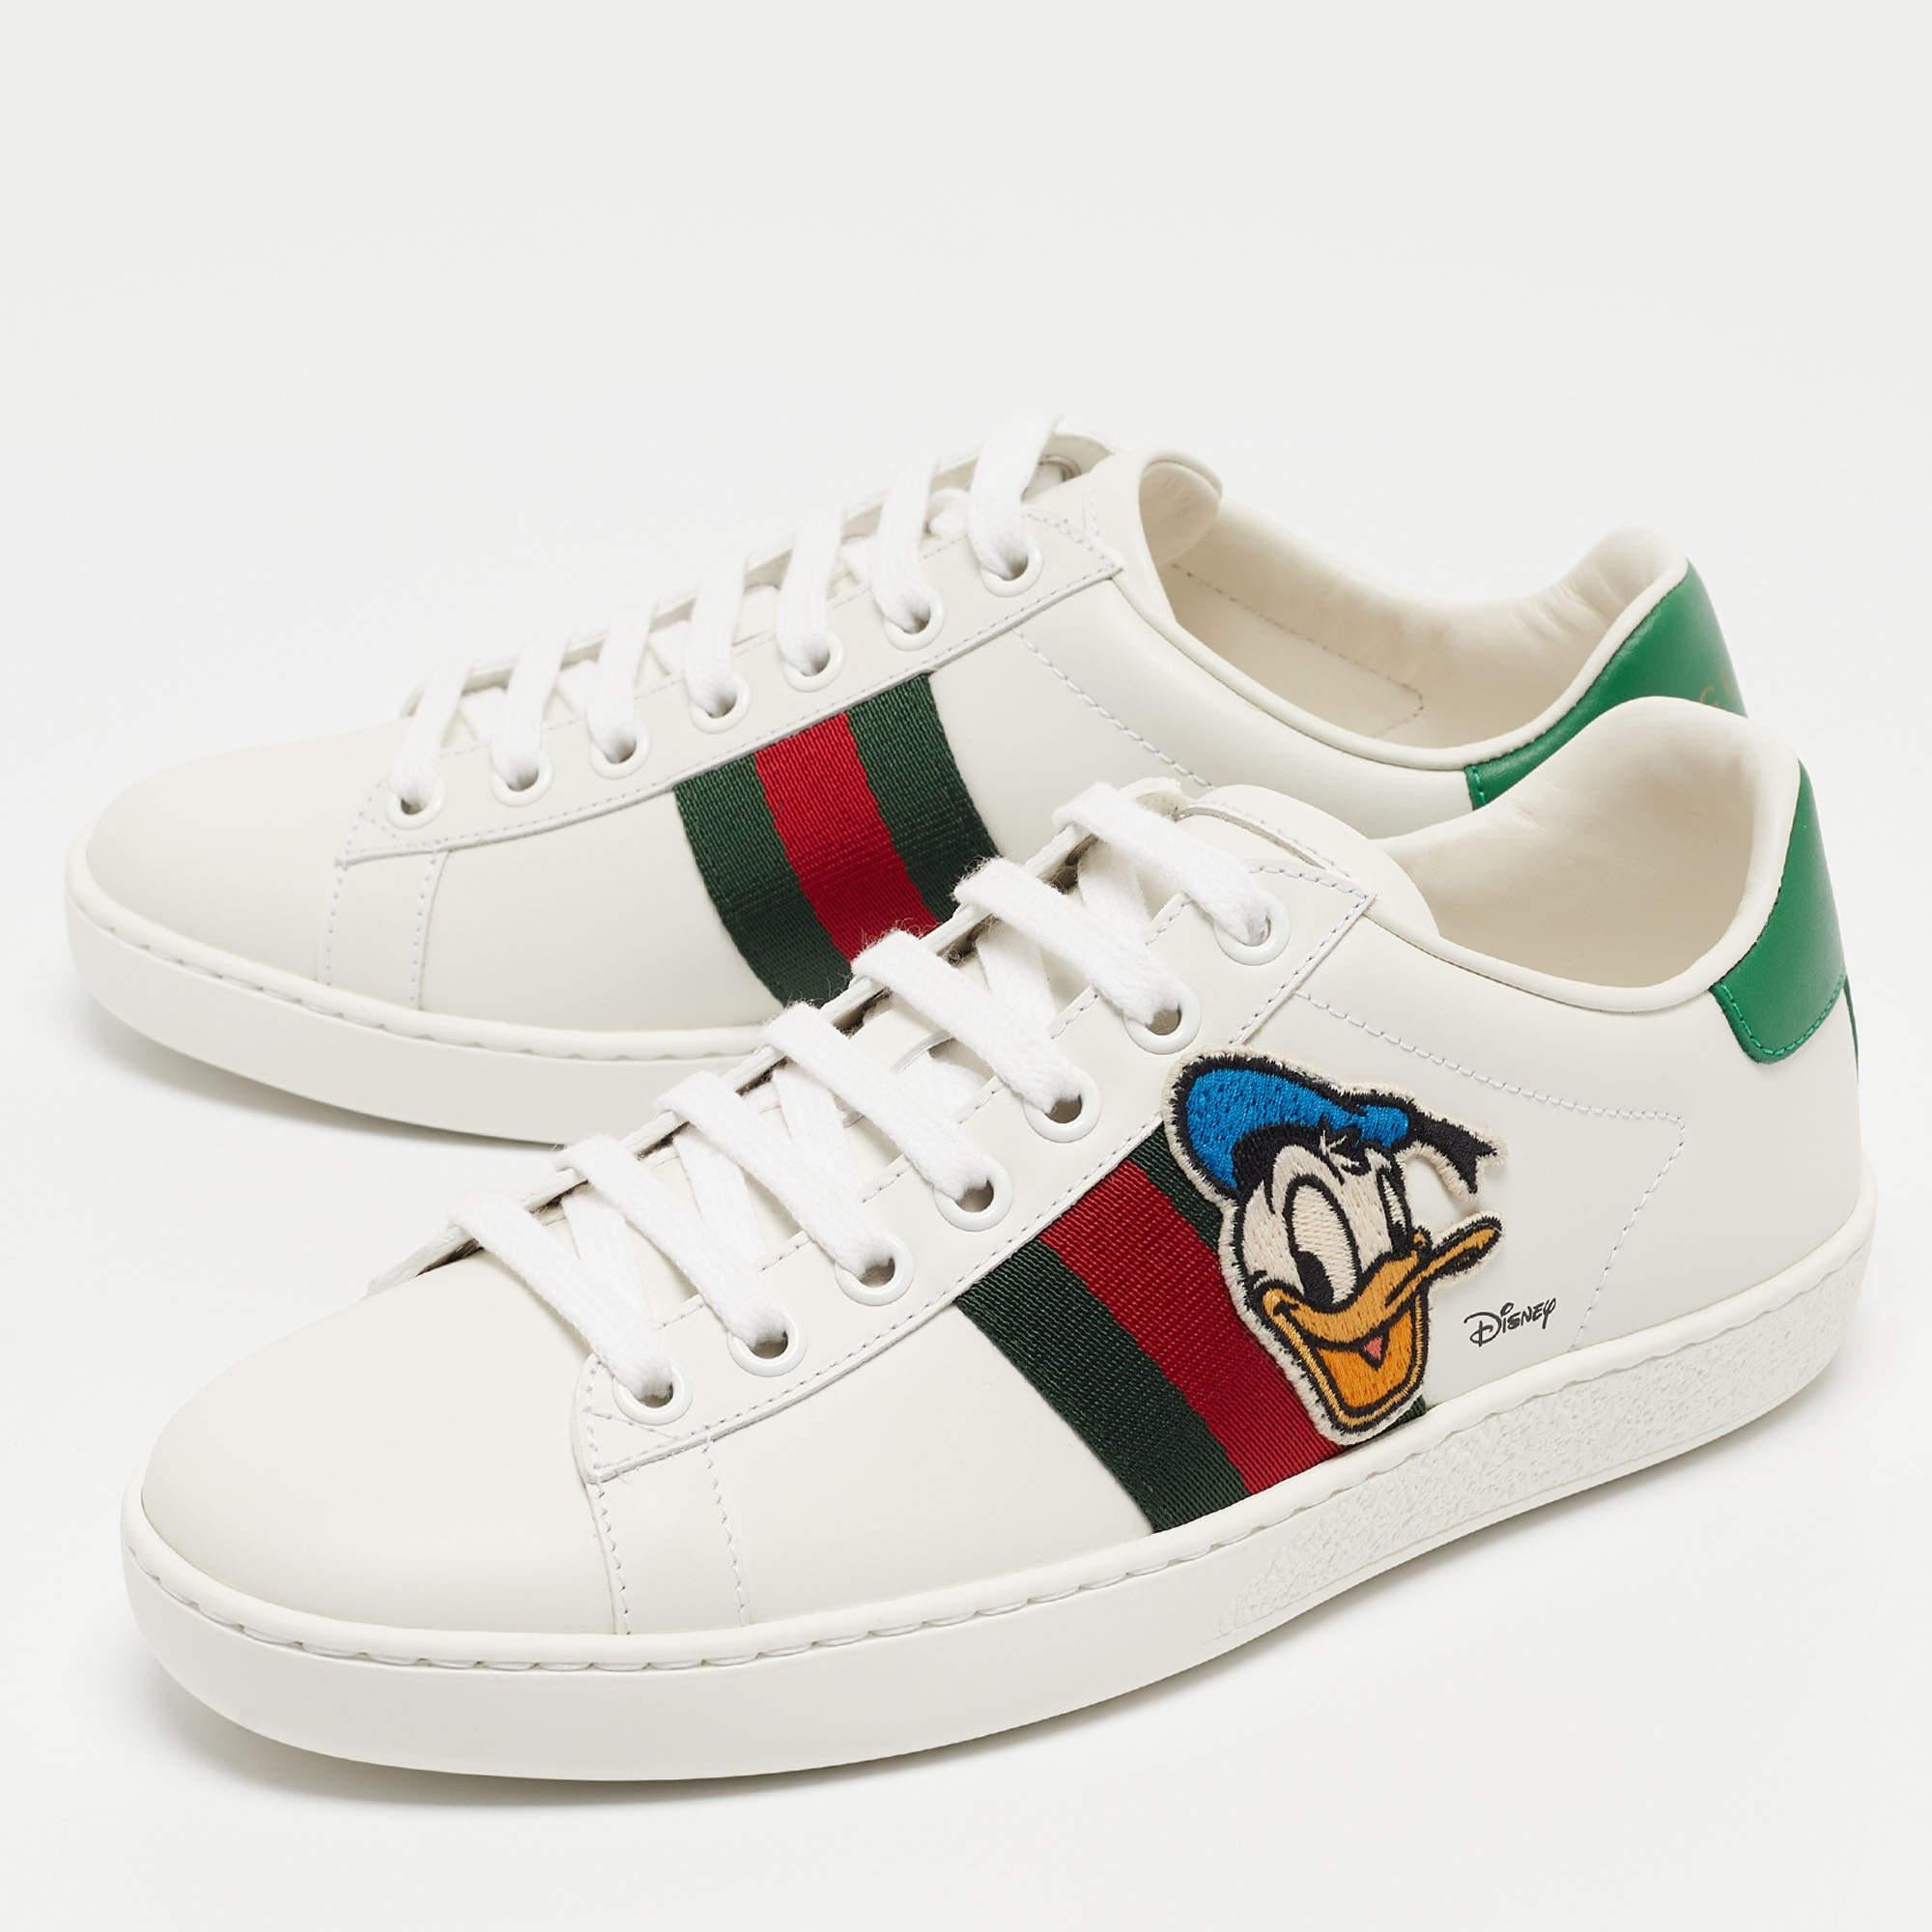 Gucci x Disney White Leather Donald Duck Ace Sneakers Size 34.5 For Sale 2